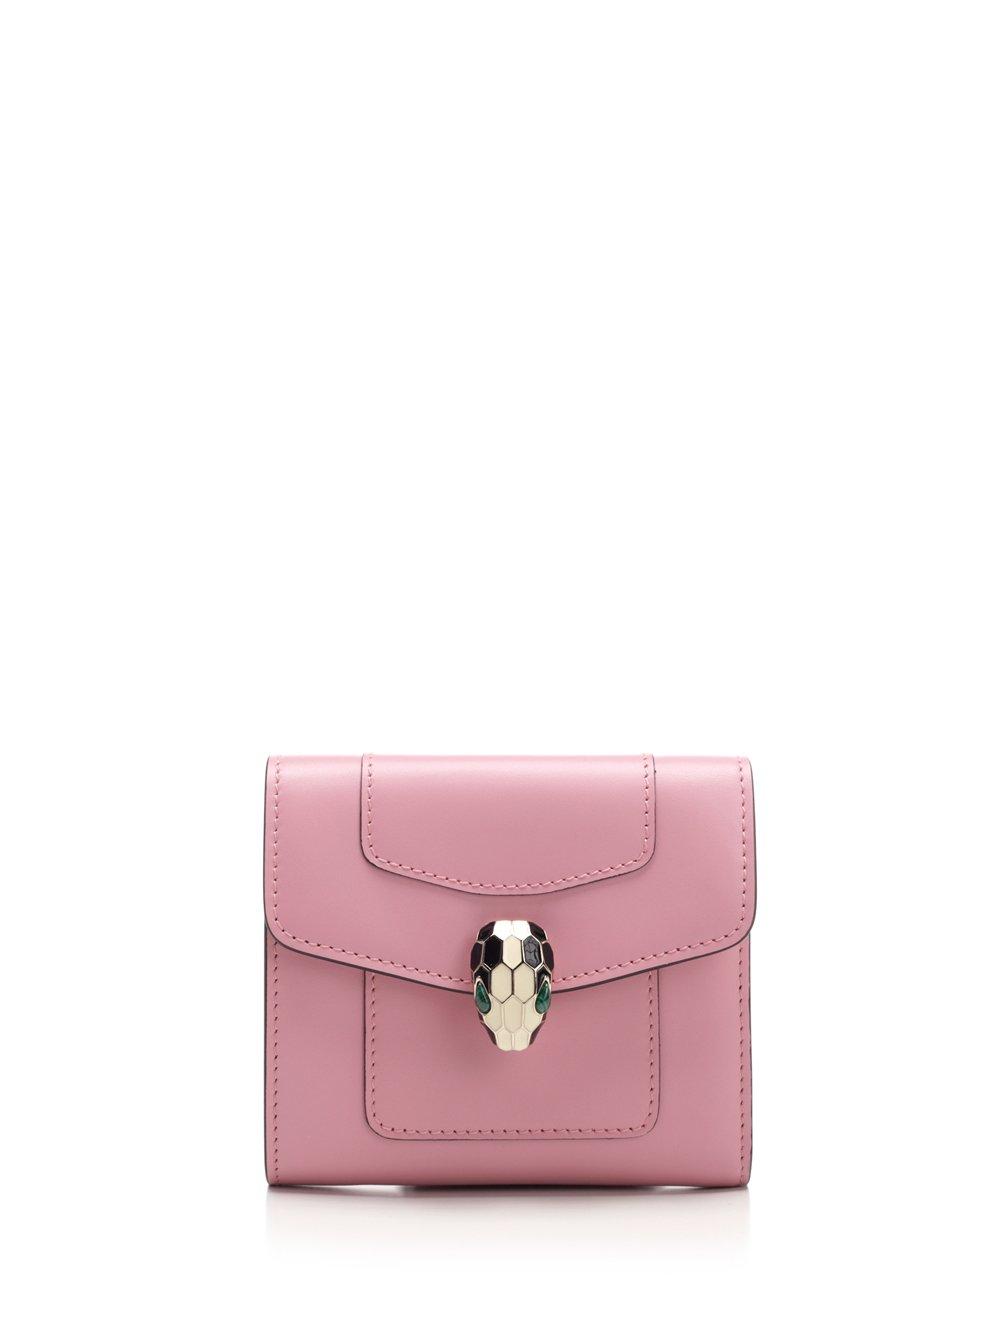 BVLGARI Serpenti Forever Leather Wallet in Pink | Lyst